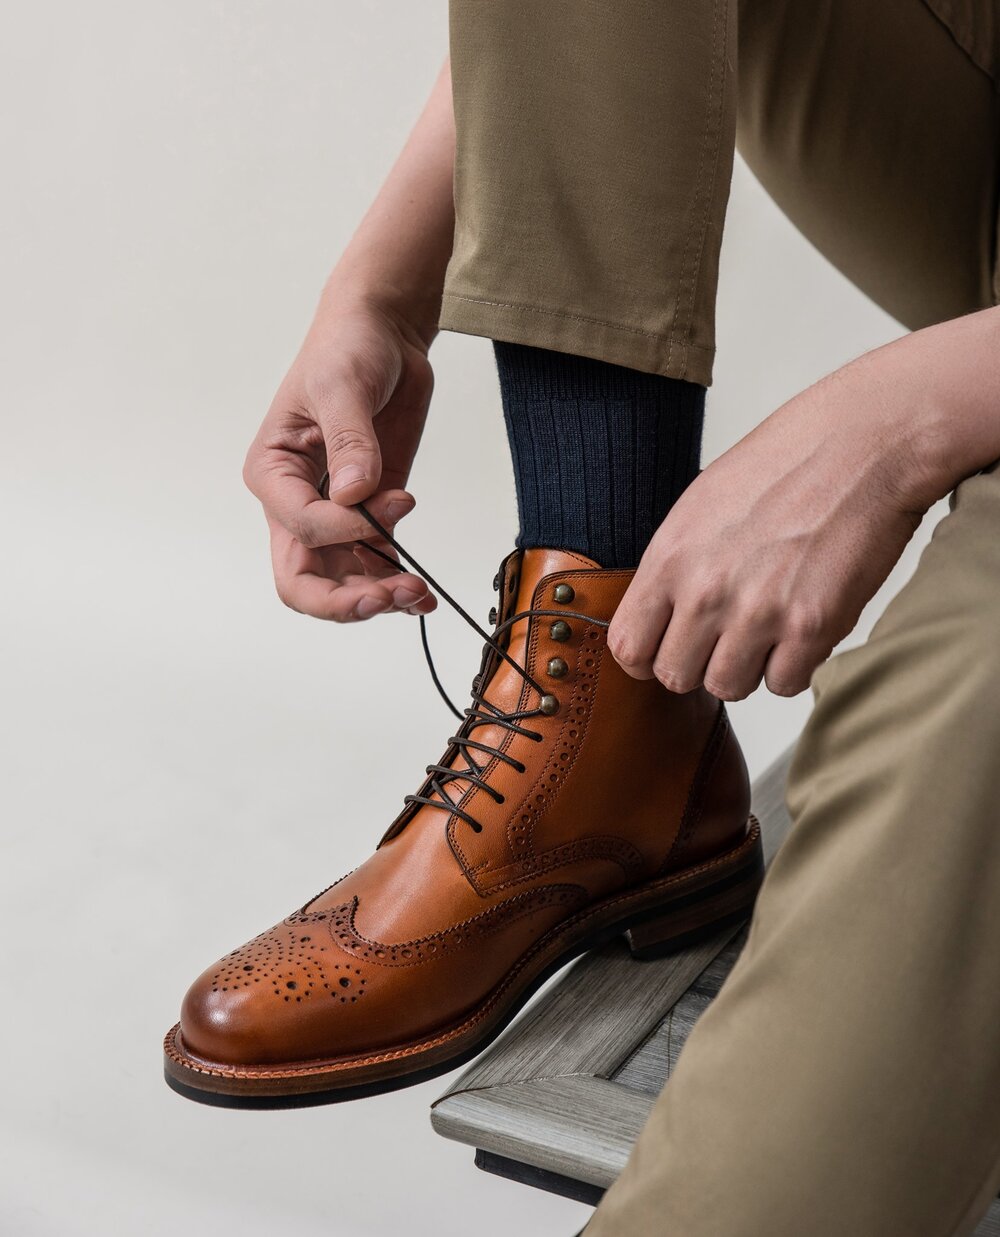 12 sustainable men's shoe brands your feet and the planet will